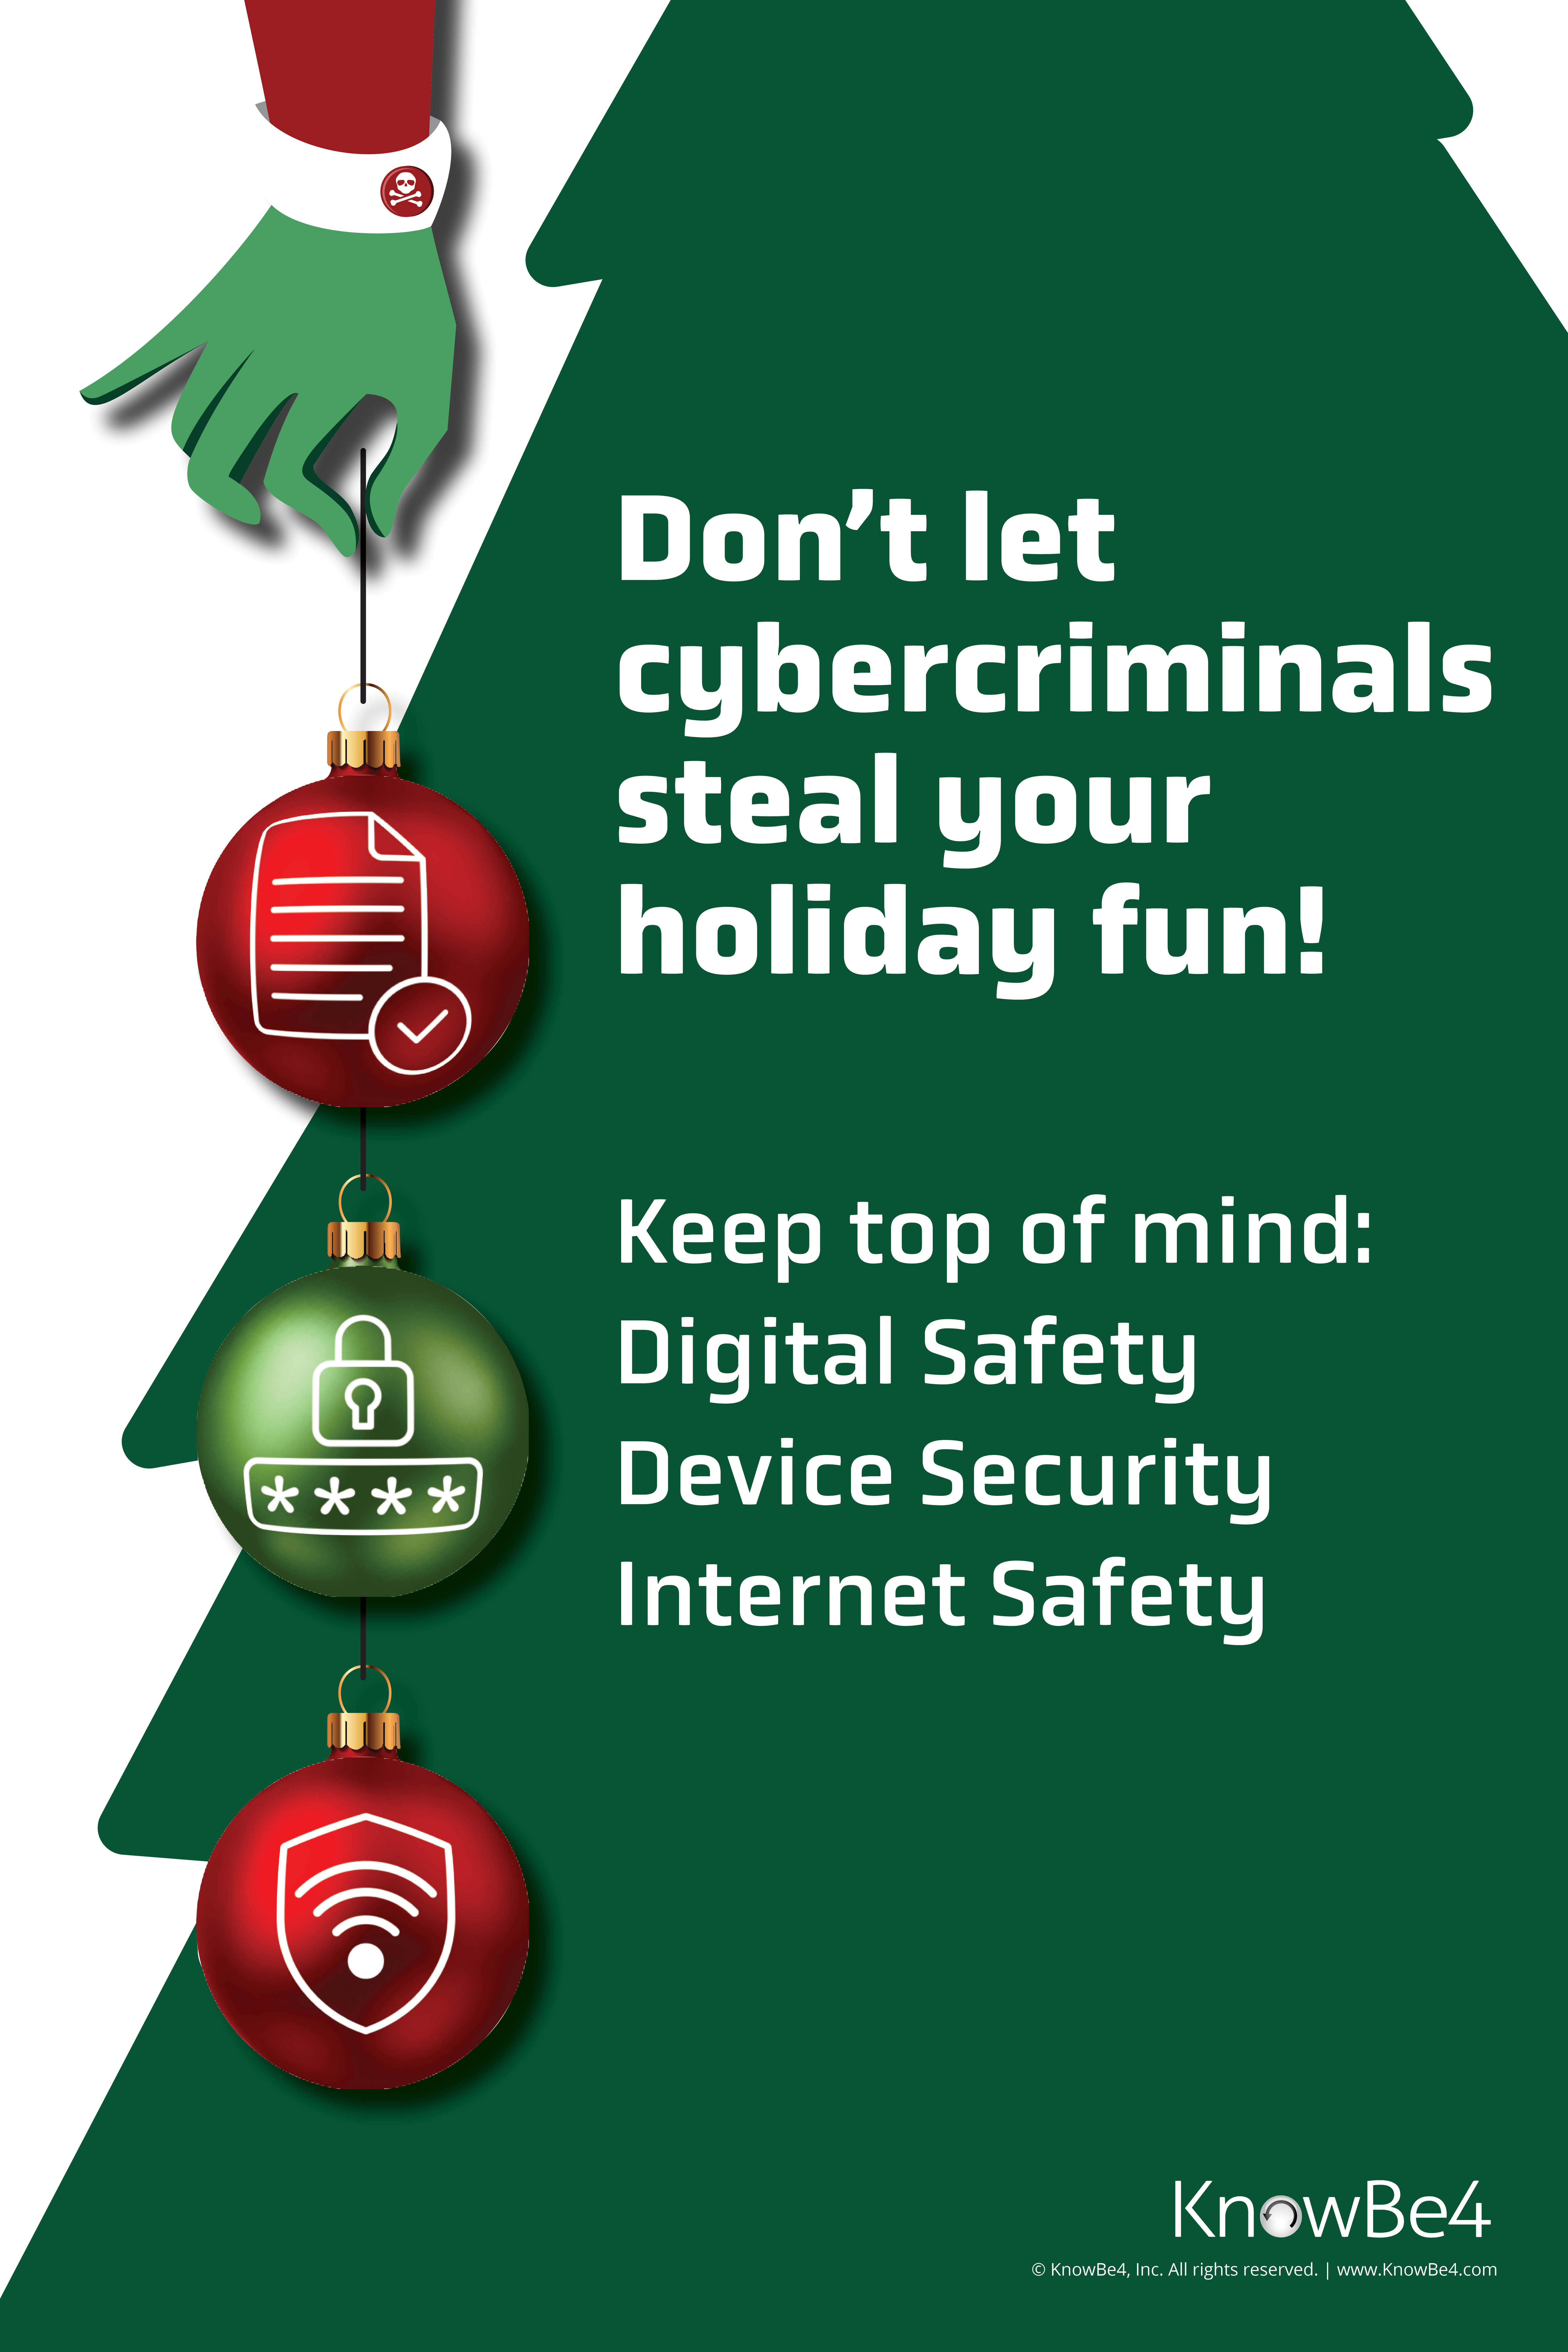 Don't let cyber criminals steal your holiday fun. keep top of mind: digital safety, device security, internet safety.